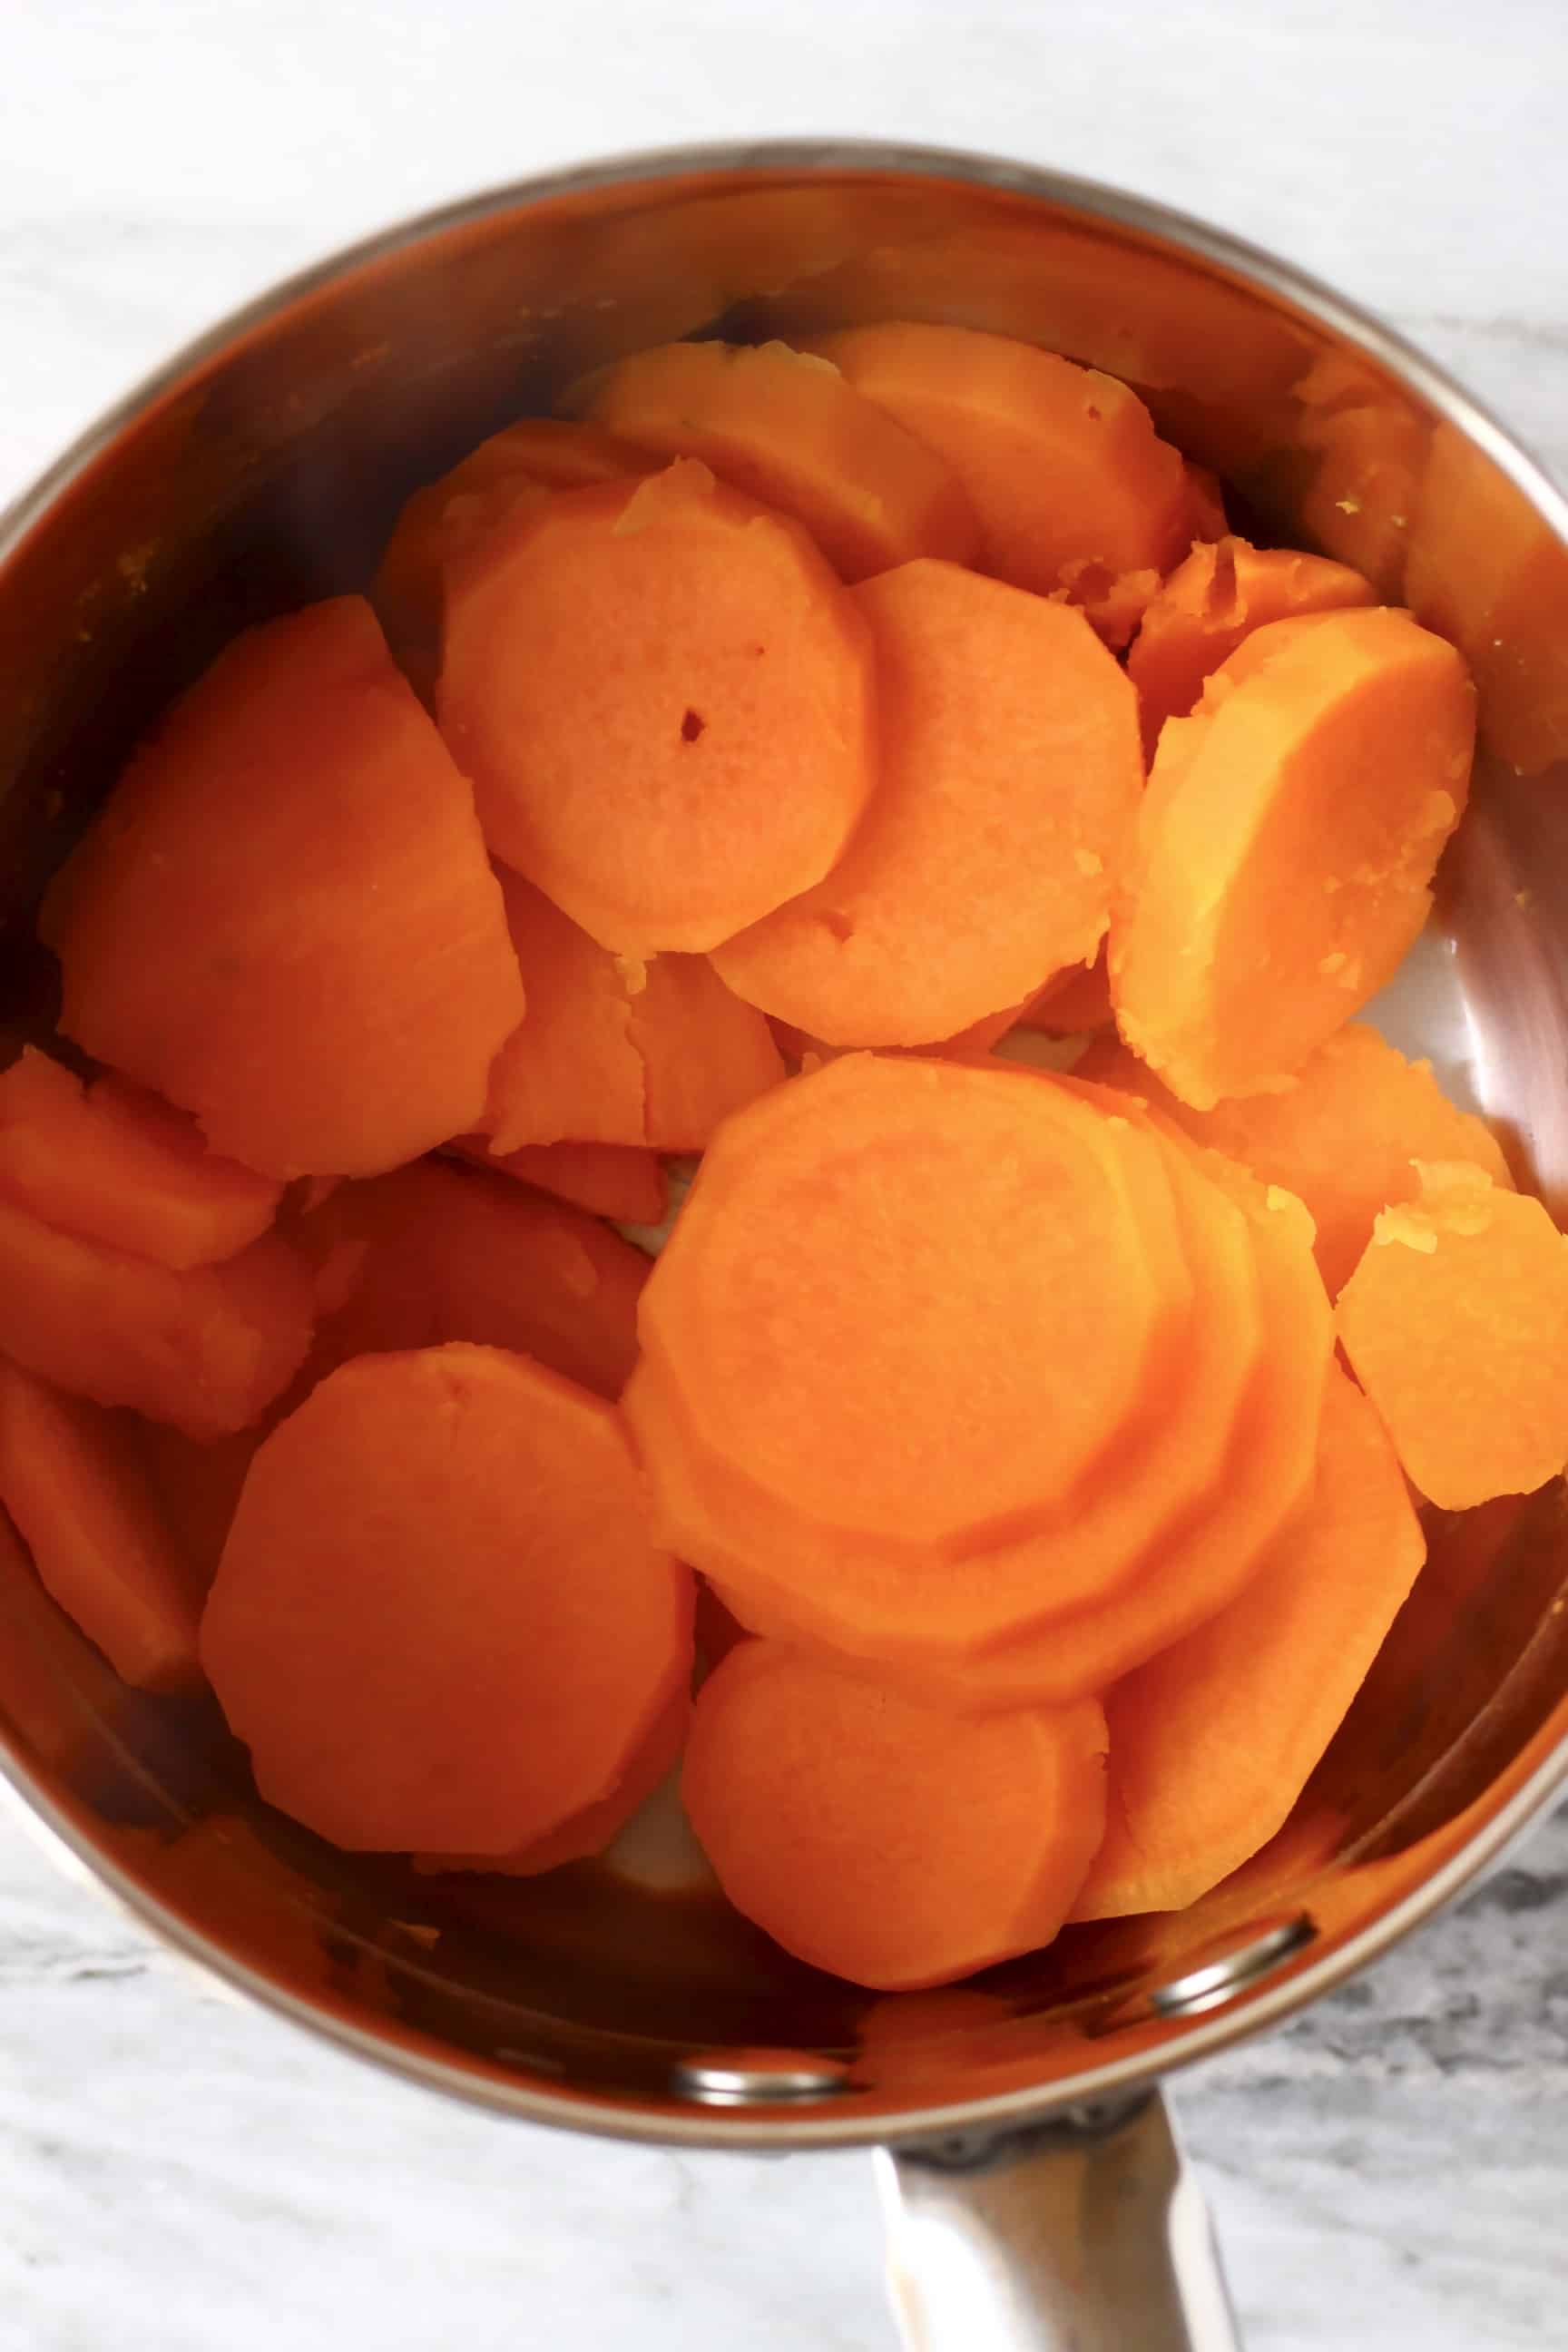 Sliced cooked sweet potatoes in a silver pan